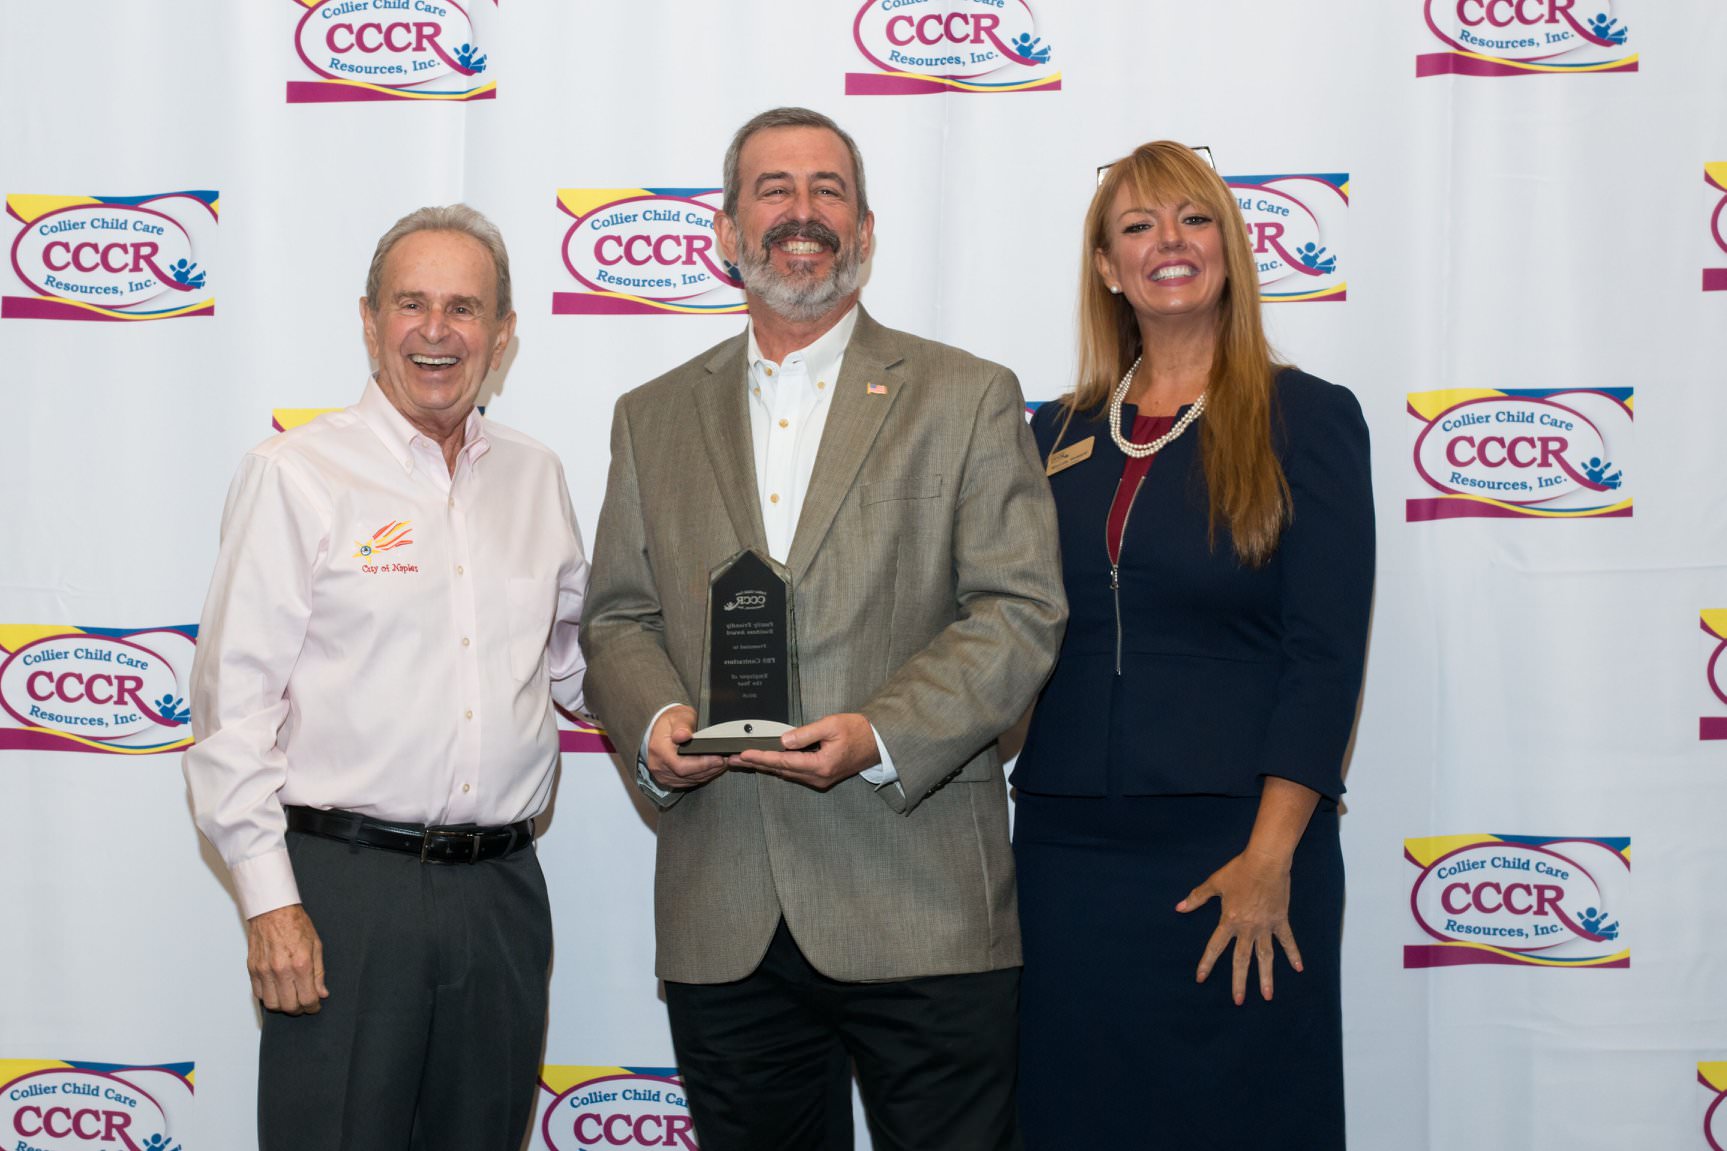 PBS Contractors Honored By Collier Child Care Resources, Inc. for Being a Family Friendly Business